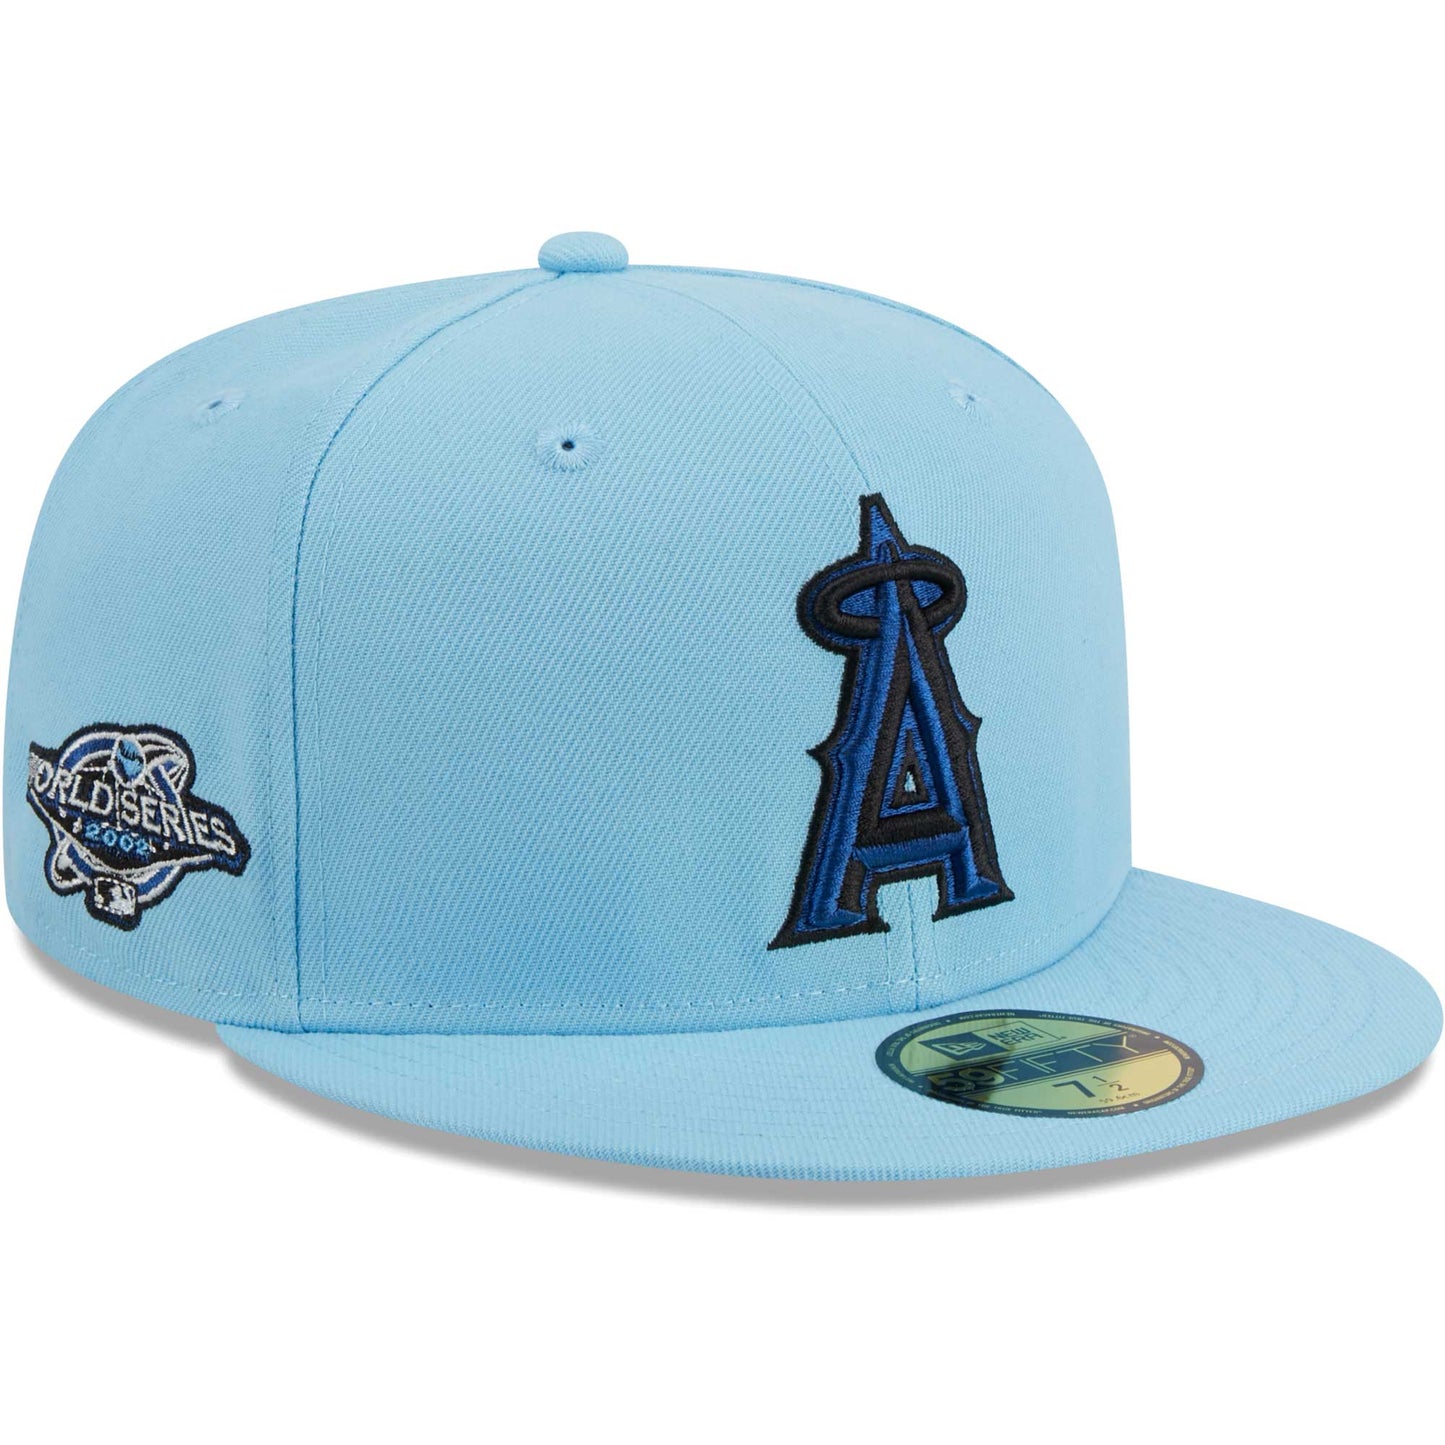 Los Angeles Angels New Era 59FIFTY Fitted Hat - Light Blue